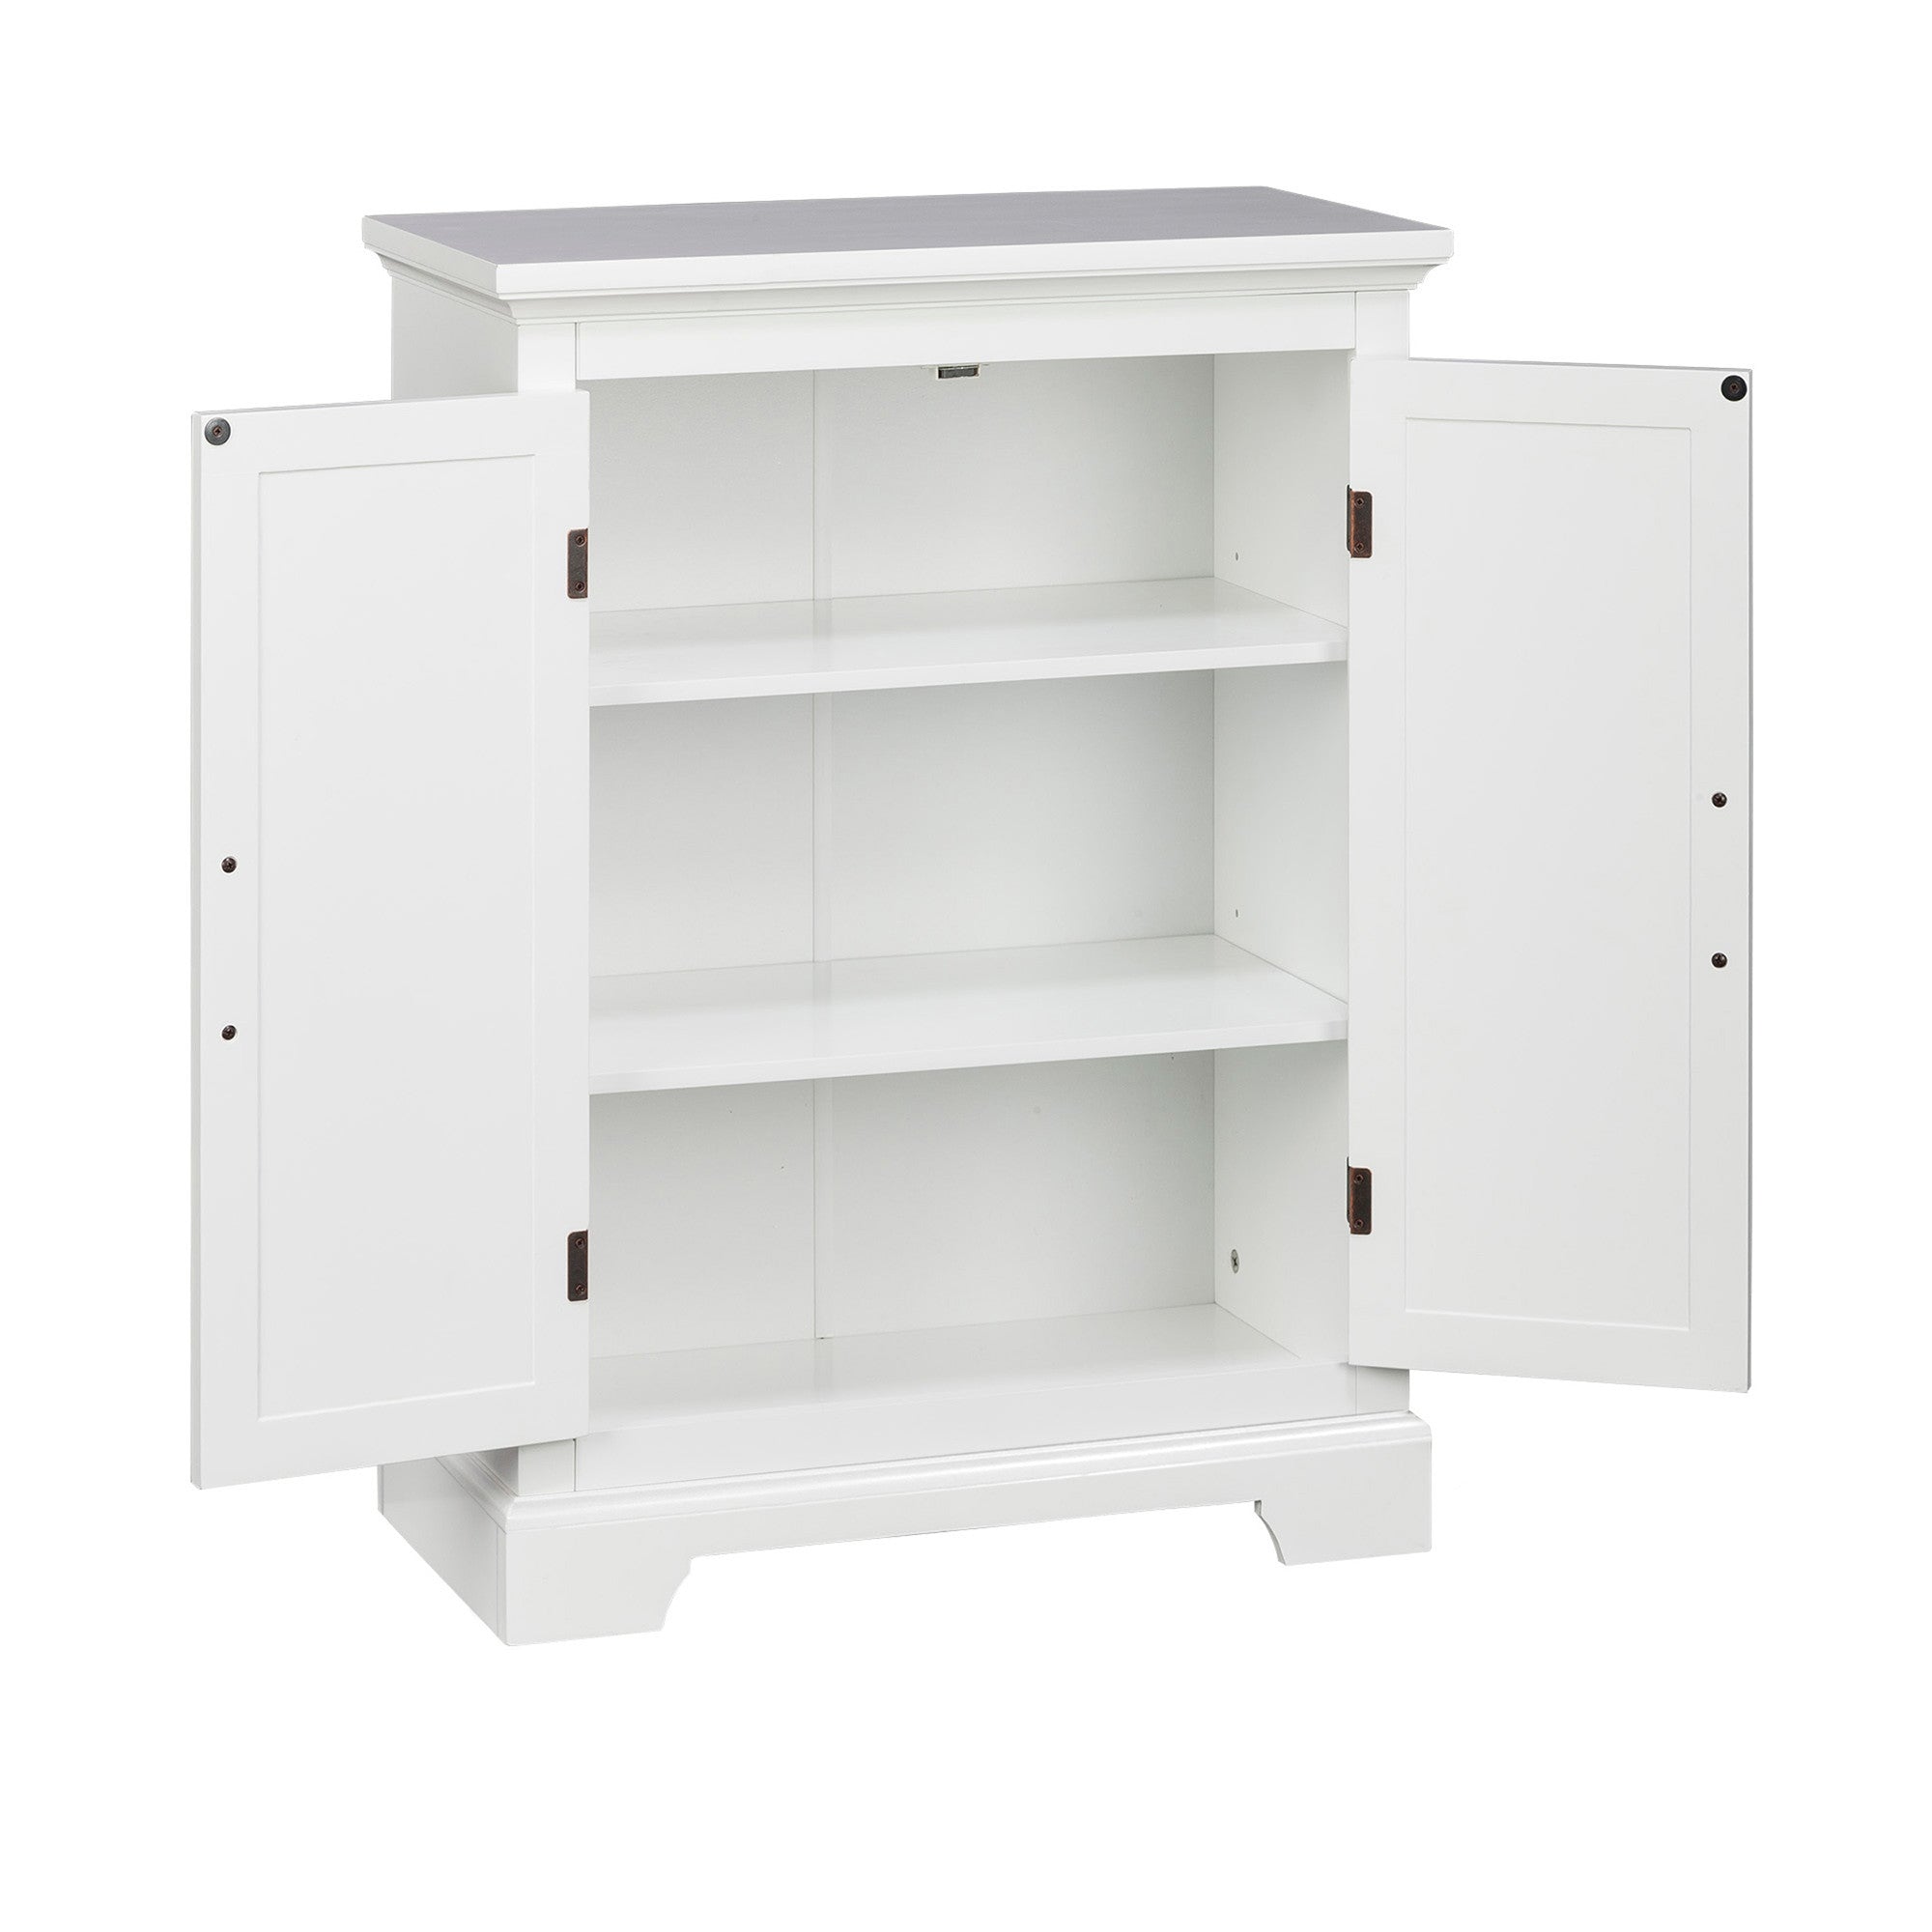 Teamson Home St. James Wooden Floor Cabinet with 3 Shelves, White